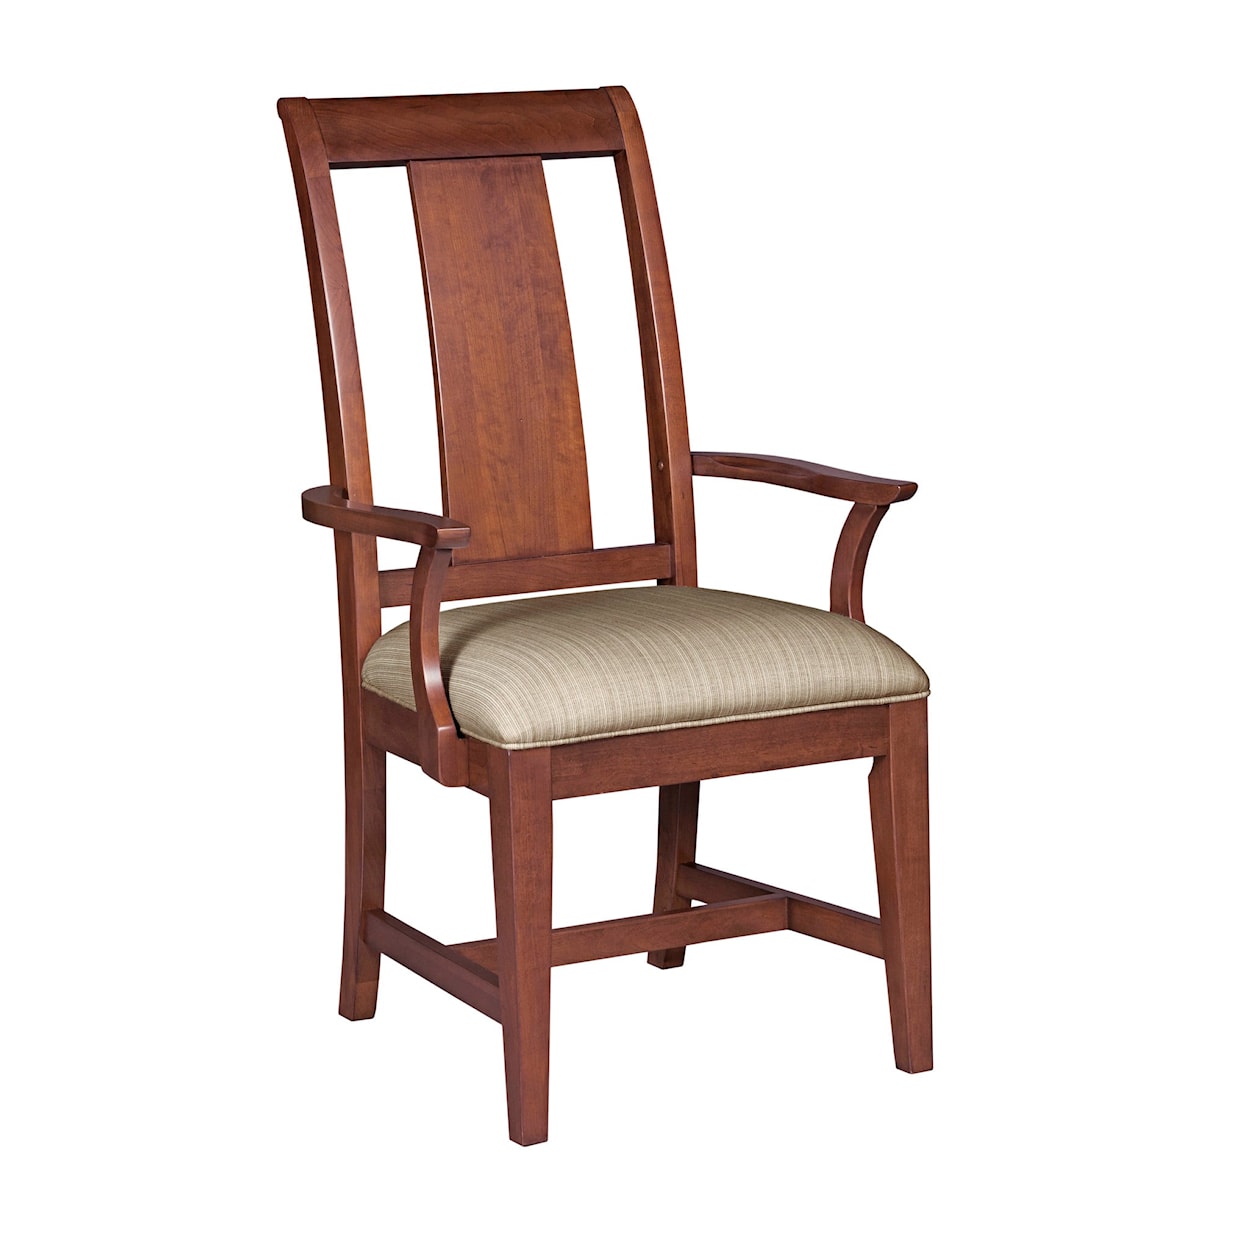 Kincaid Furniture Cherry Park Arm Chair Upholstered Seat